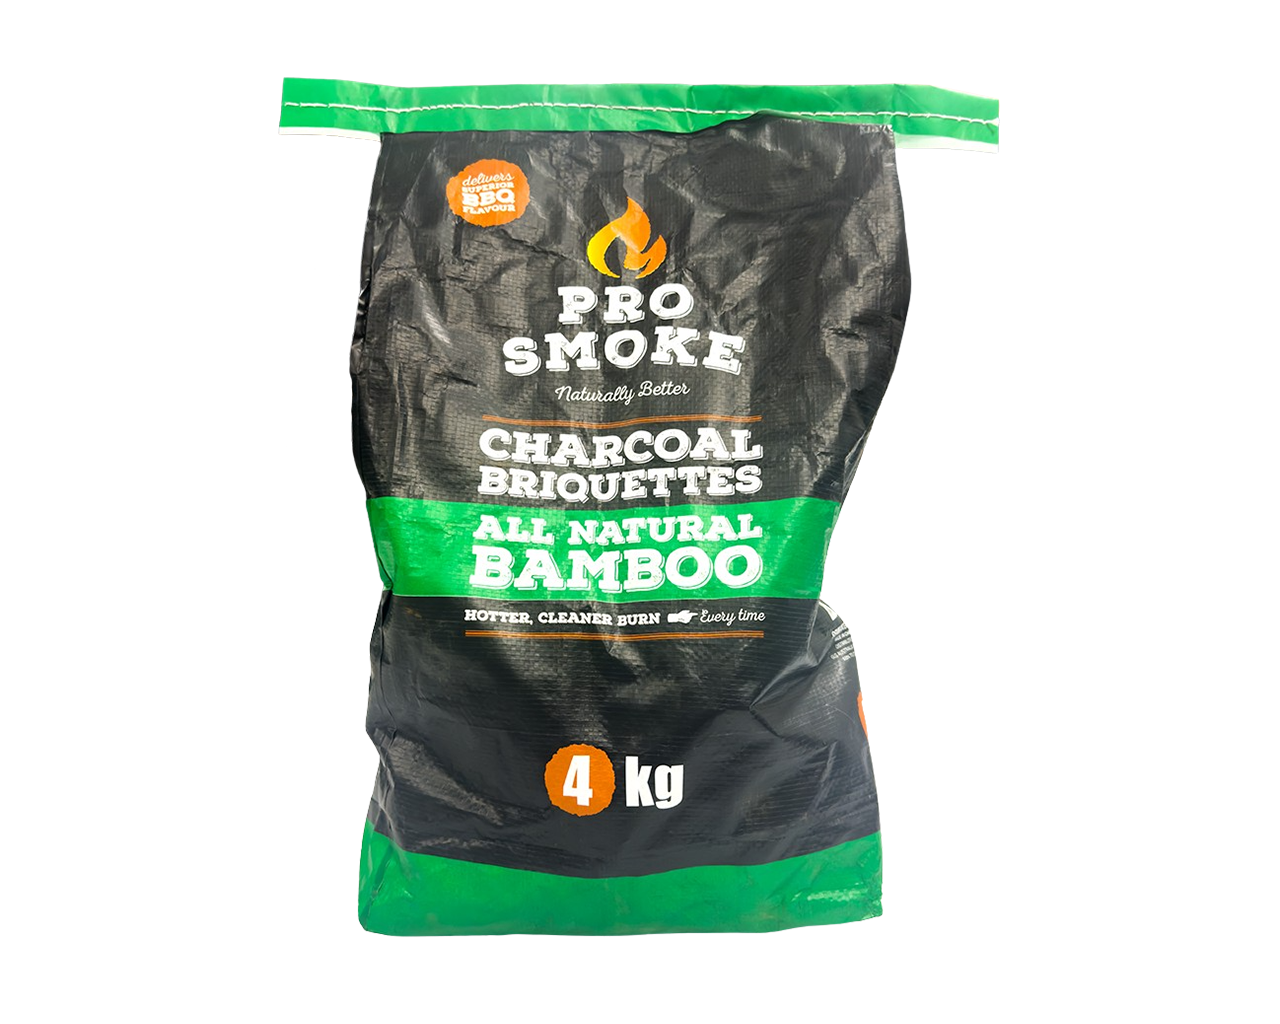 Pro Smoke Bamboo Charcoal Briquettes - 4kg, , hi-res image number null